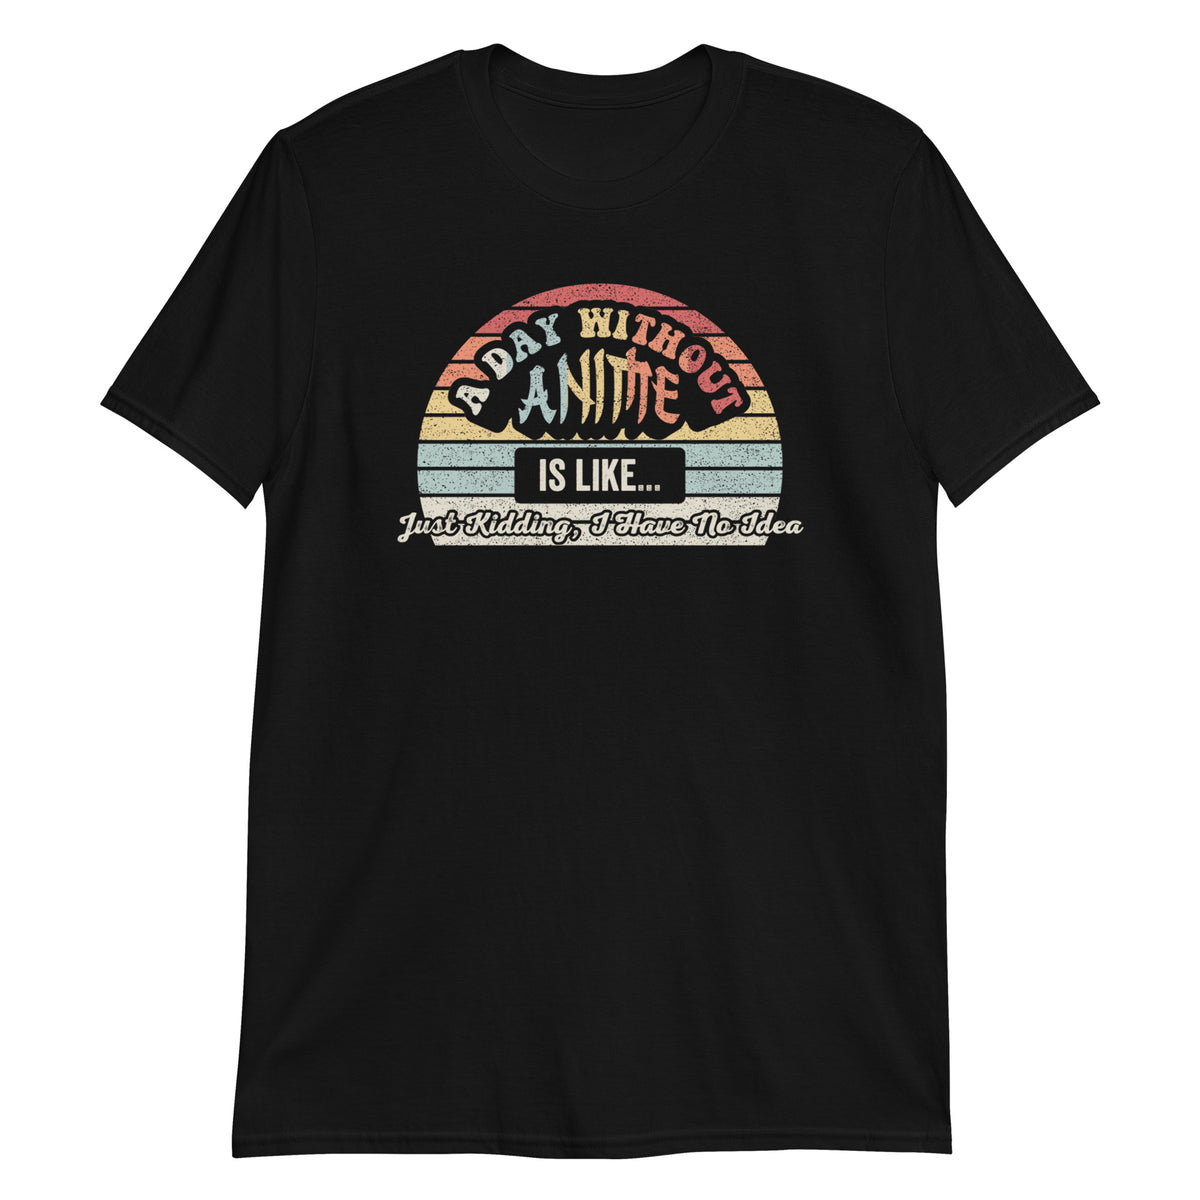 A Day Without Anime is Like Just Kidding I Have No Idea T-Shirt